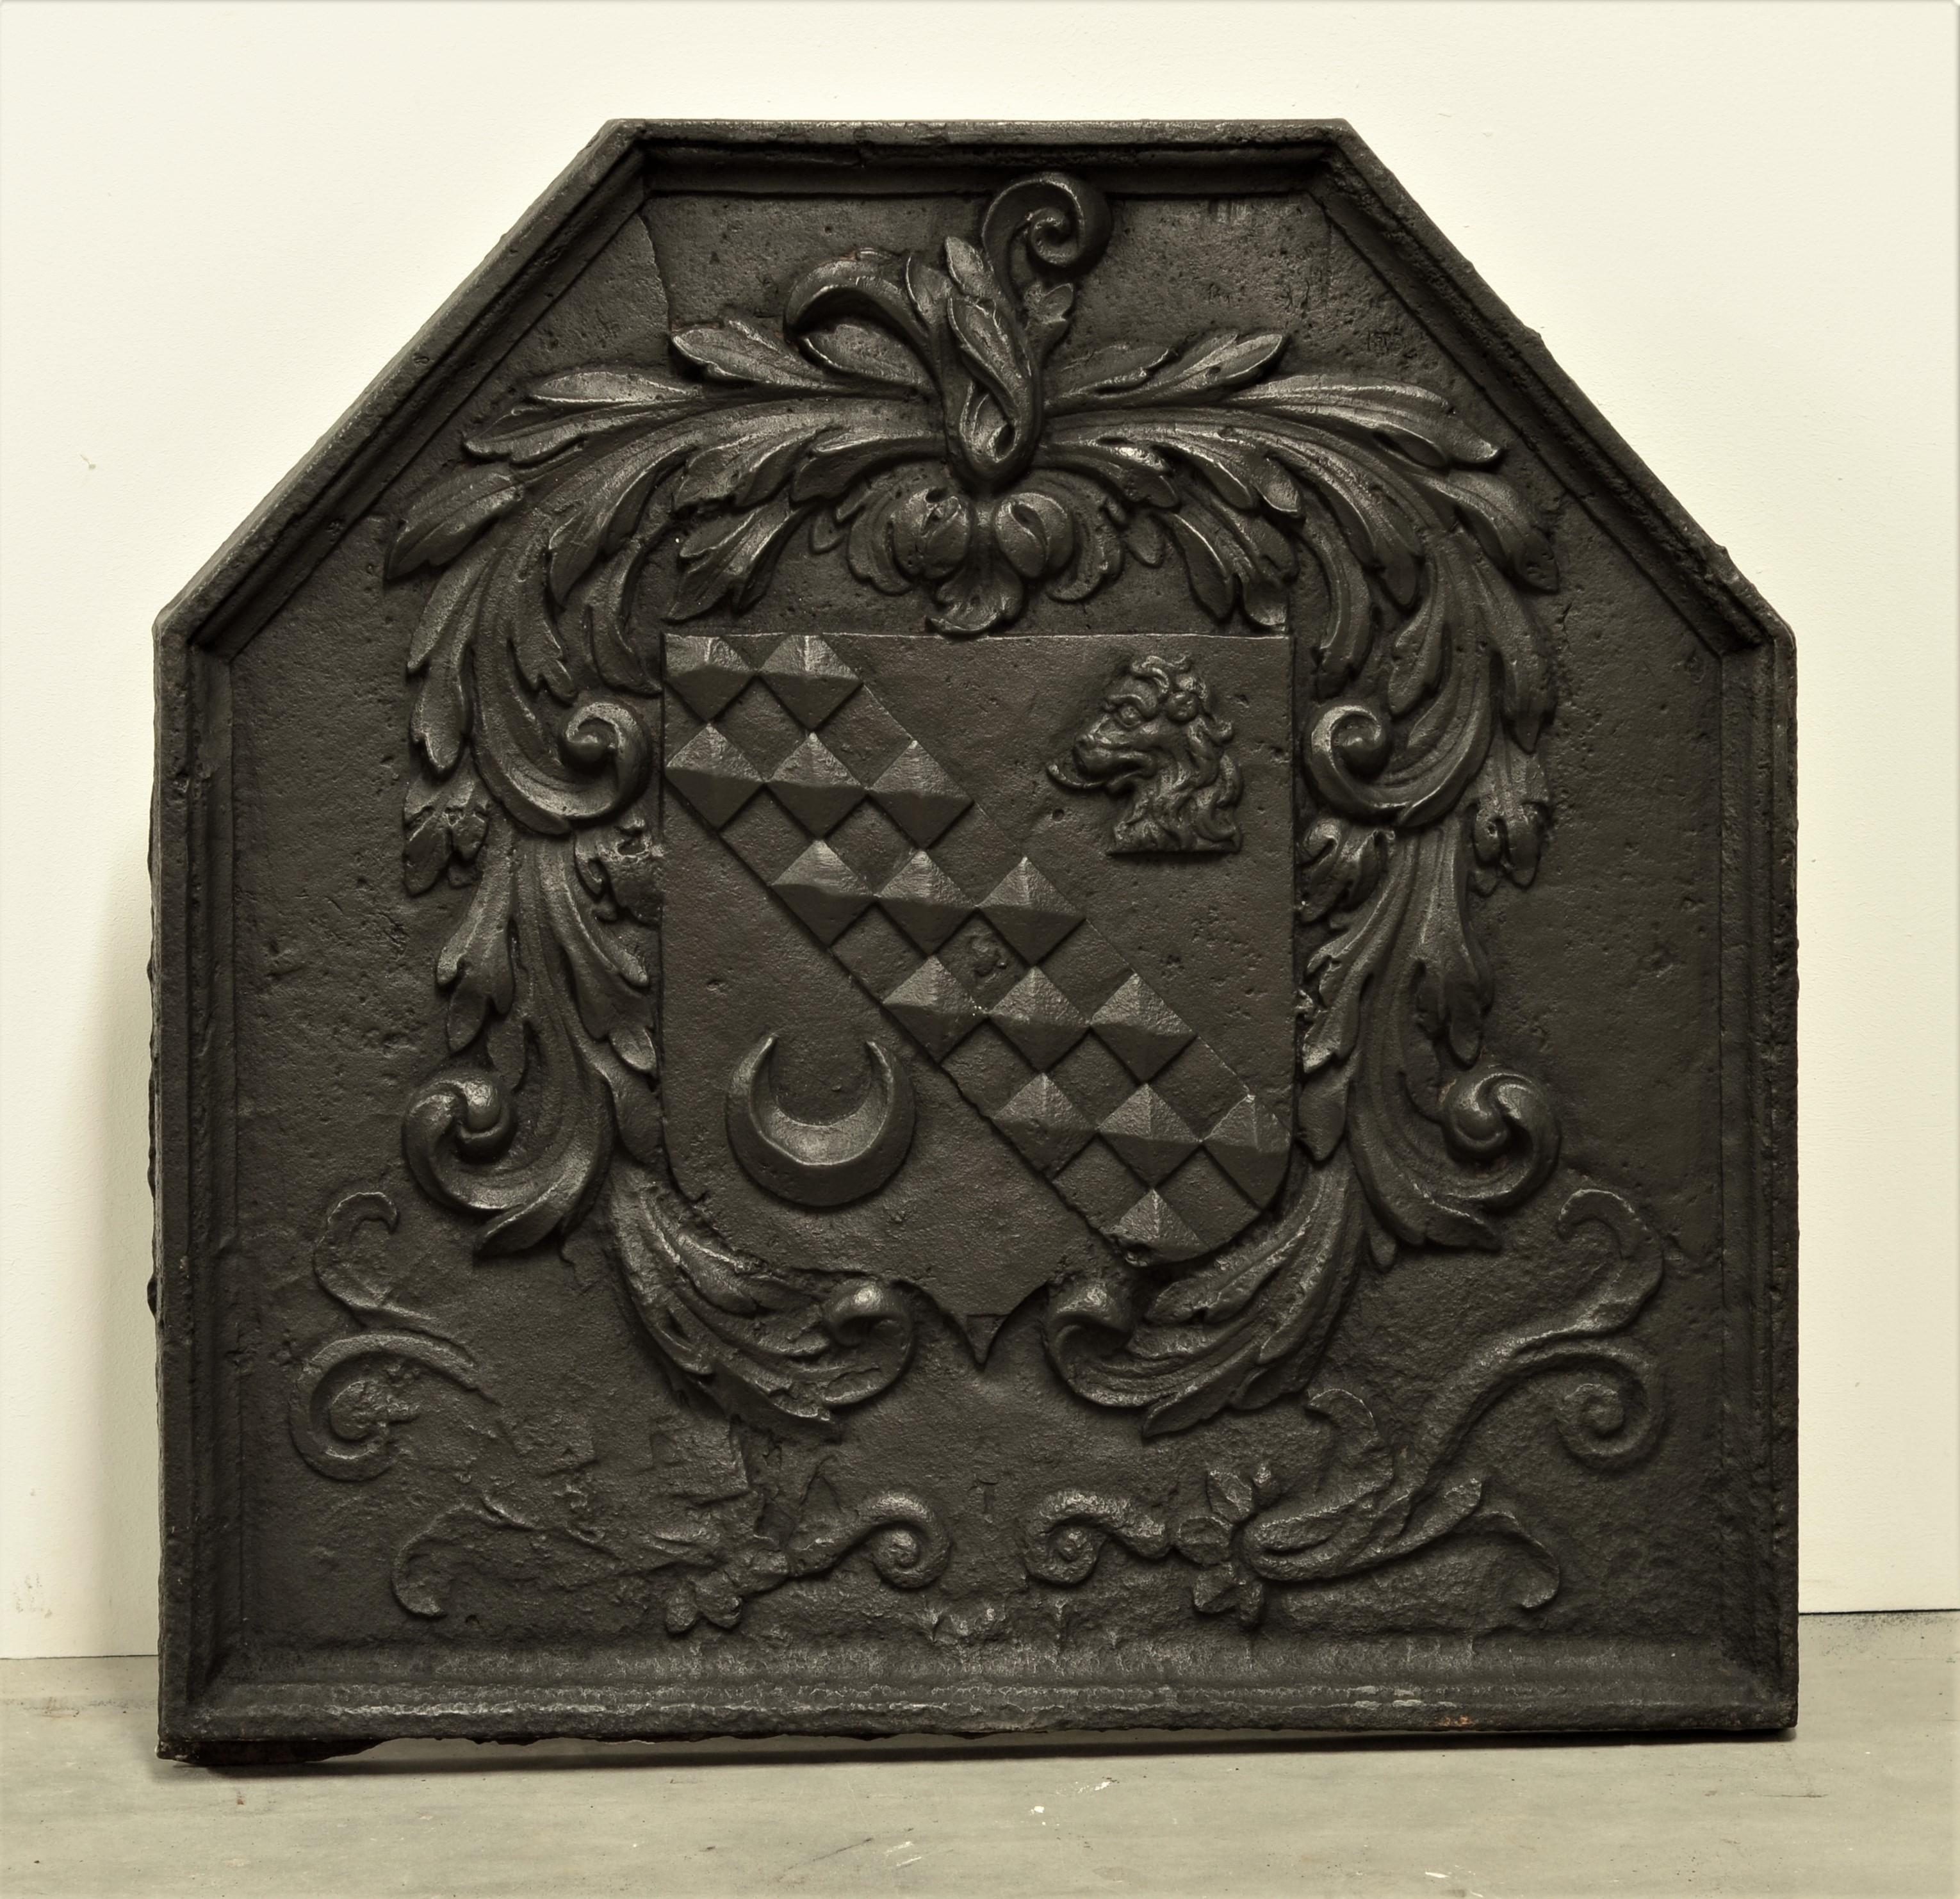 Beautiful antique cast iron fireback / backsplash.
Great condition very detailed.

The lion in the crest is a common charge in heraldry. It traditionally symbolises bravery, valour, strength, and royalty, since traditionally, it is regarded as